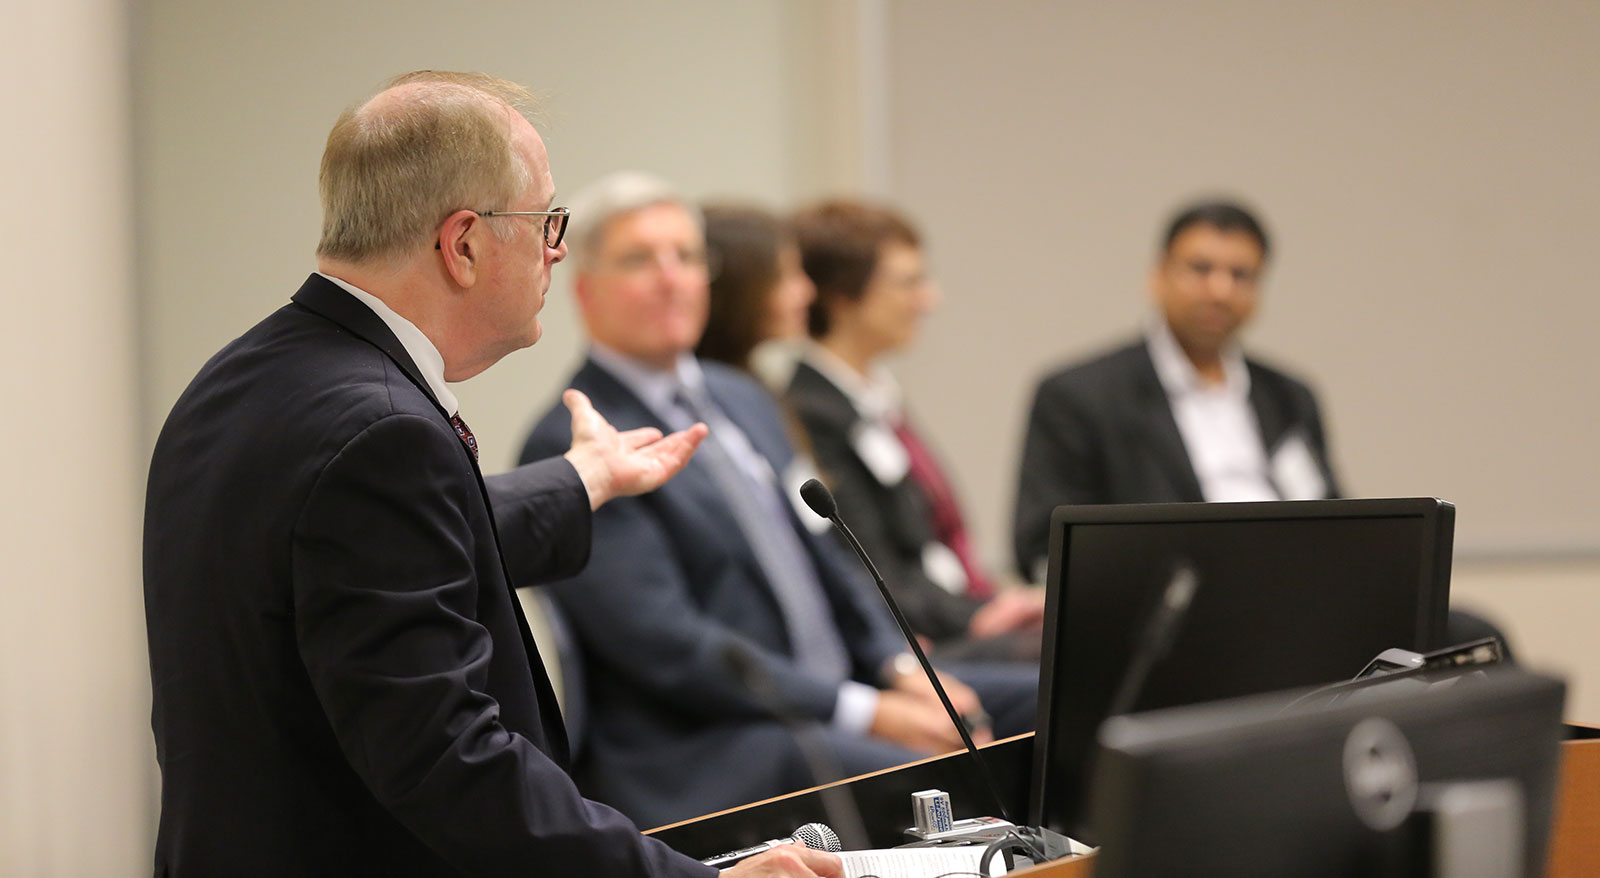 Kevin Harter of Penn State Center for Medical Innovation addresses a panel consisting of Anthony P. Bihl, Andrea Lauber, Jacquelyn Fetrow and Nishit Trivedi at the 2016 Innovation Awards ceremony. The 2017 event will be held Nov. 28. Harter is pictured at left, looking to the right of the photo with his arm outstretched toward the panel, who are pictured facing the camera and Harter.